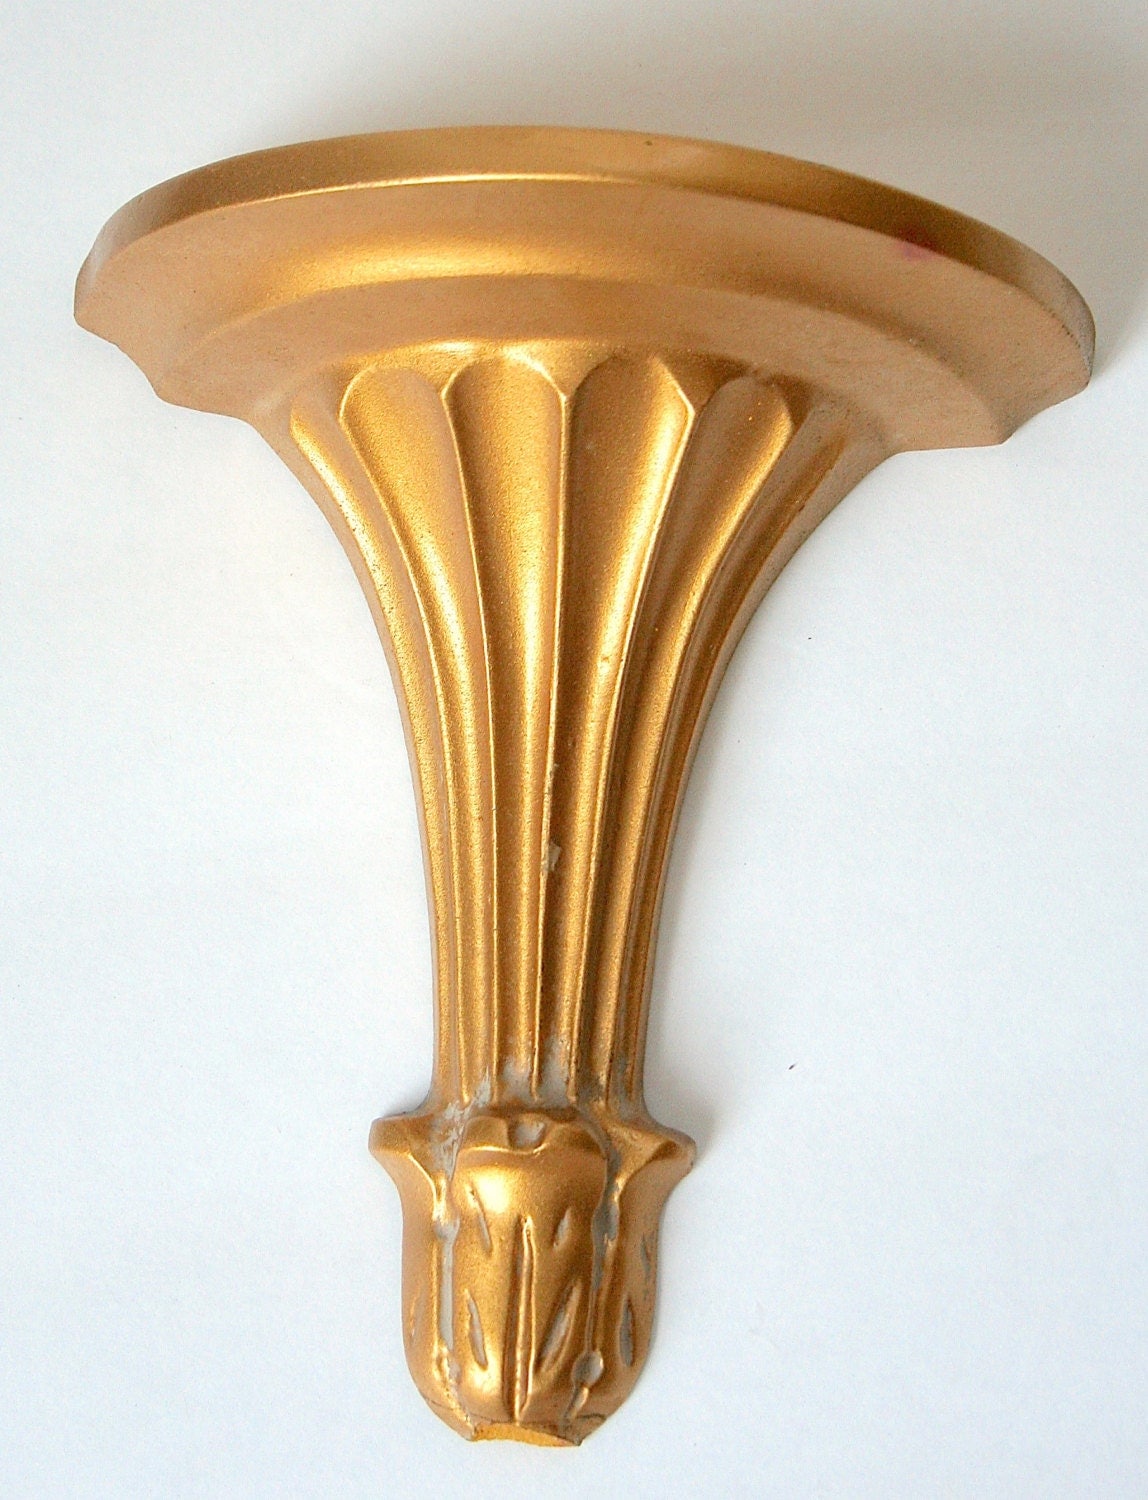 Vintage Gold Wooden Floating Wall Shelf Wood Sconce Half on Wooden Wall Sconce Shelf id=77698